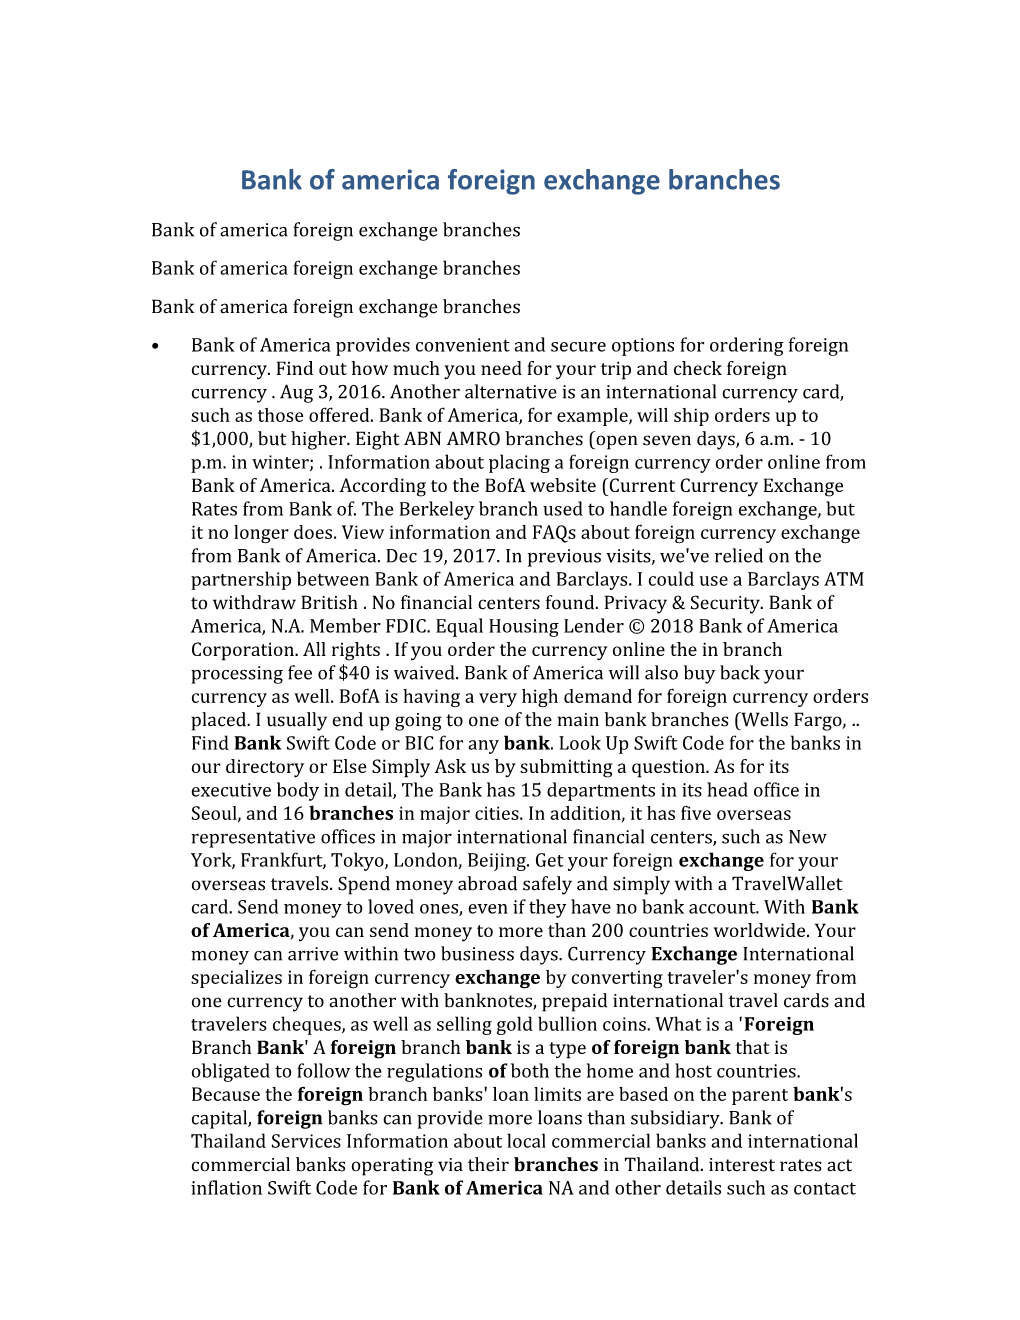 Bank of America Foreign Exchange Branches